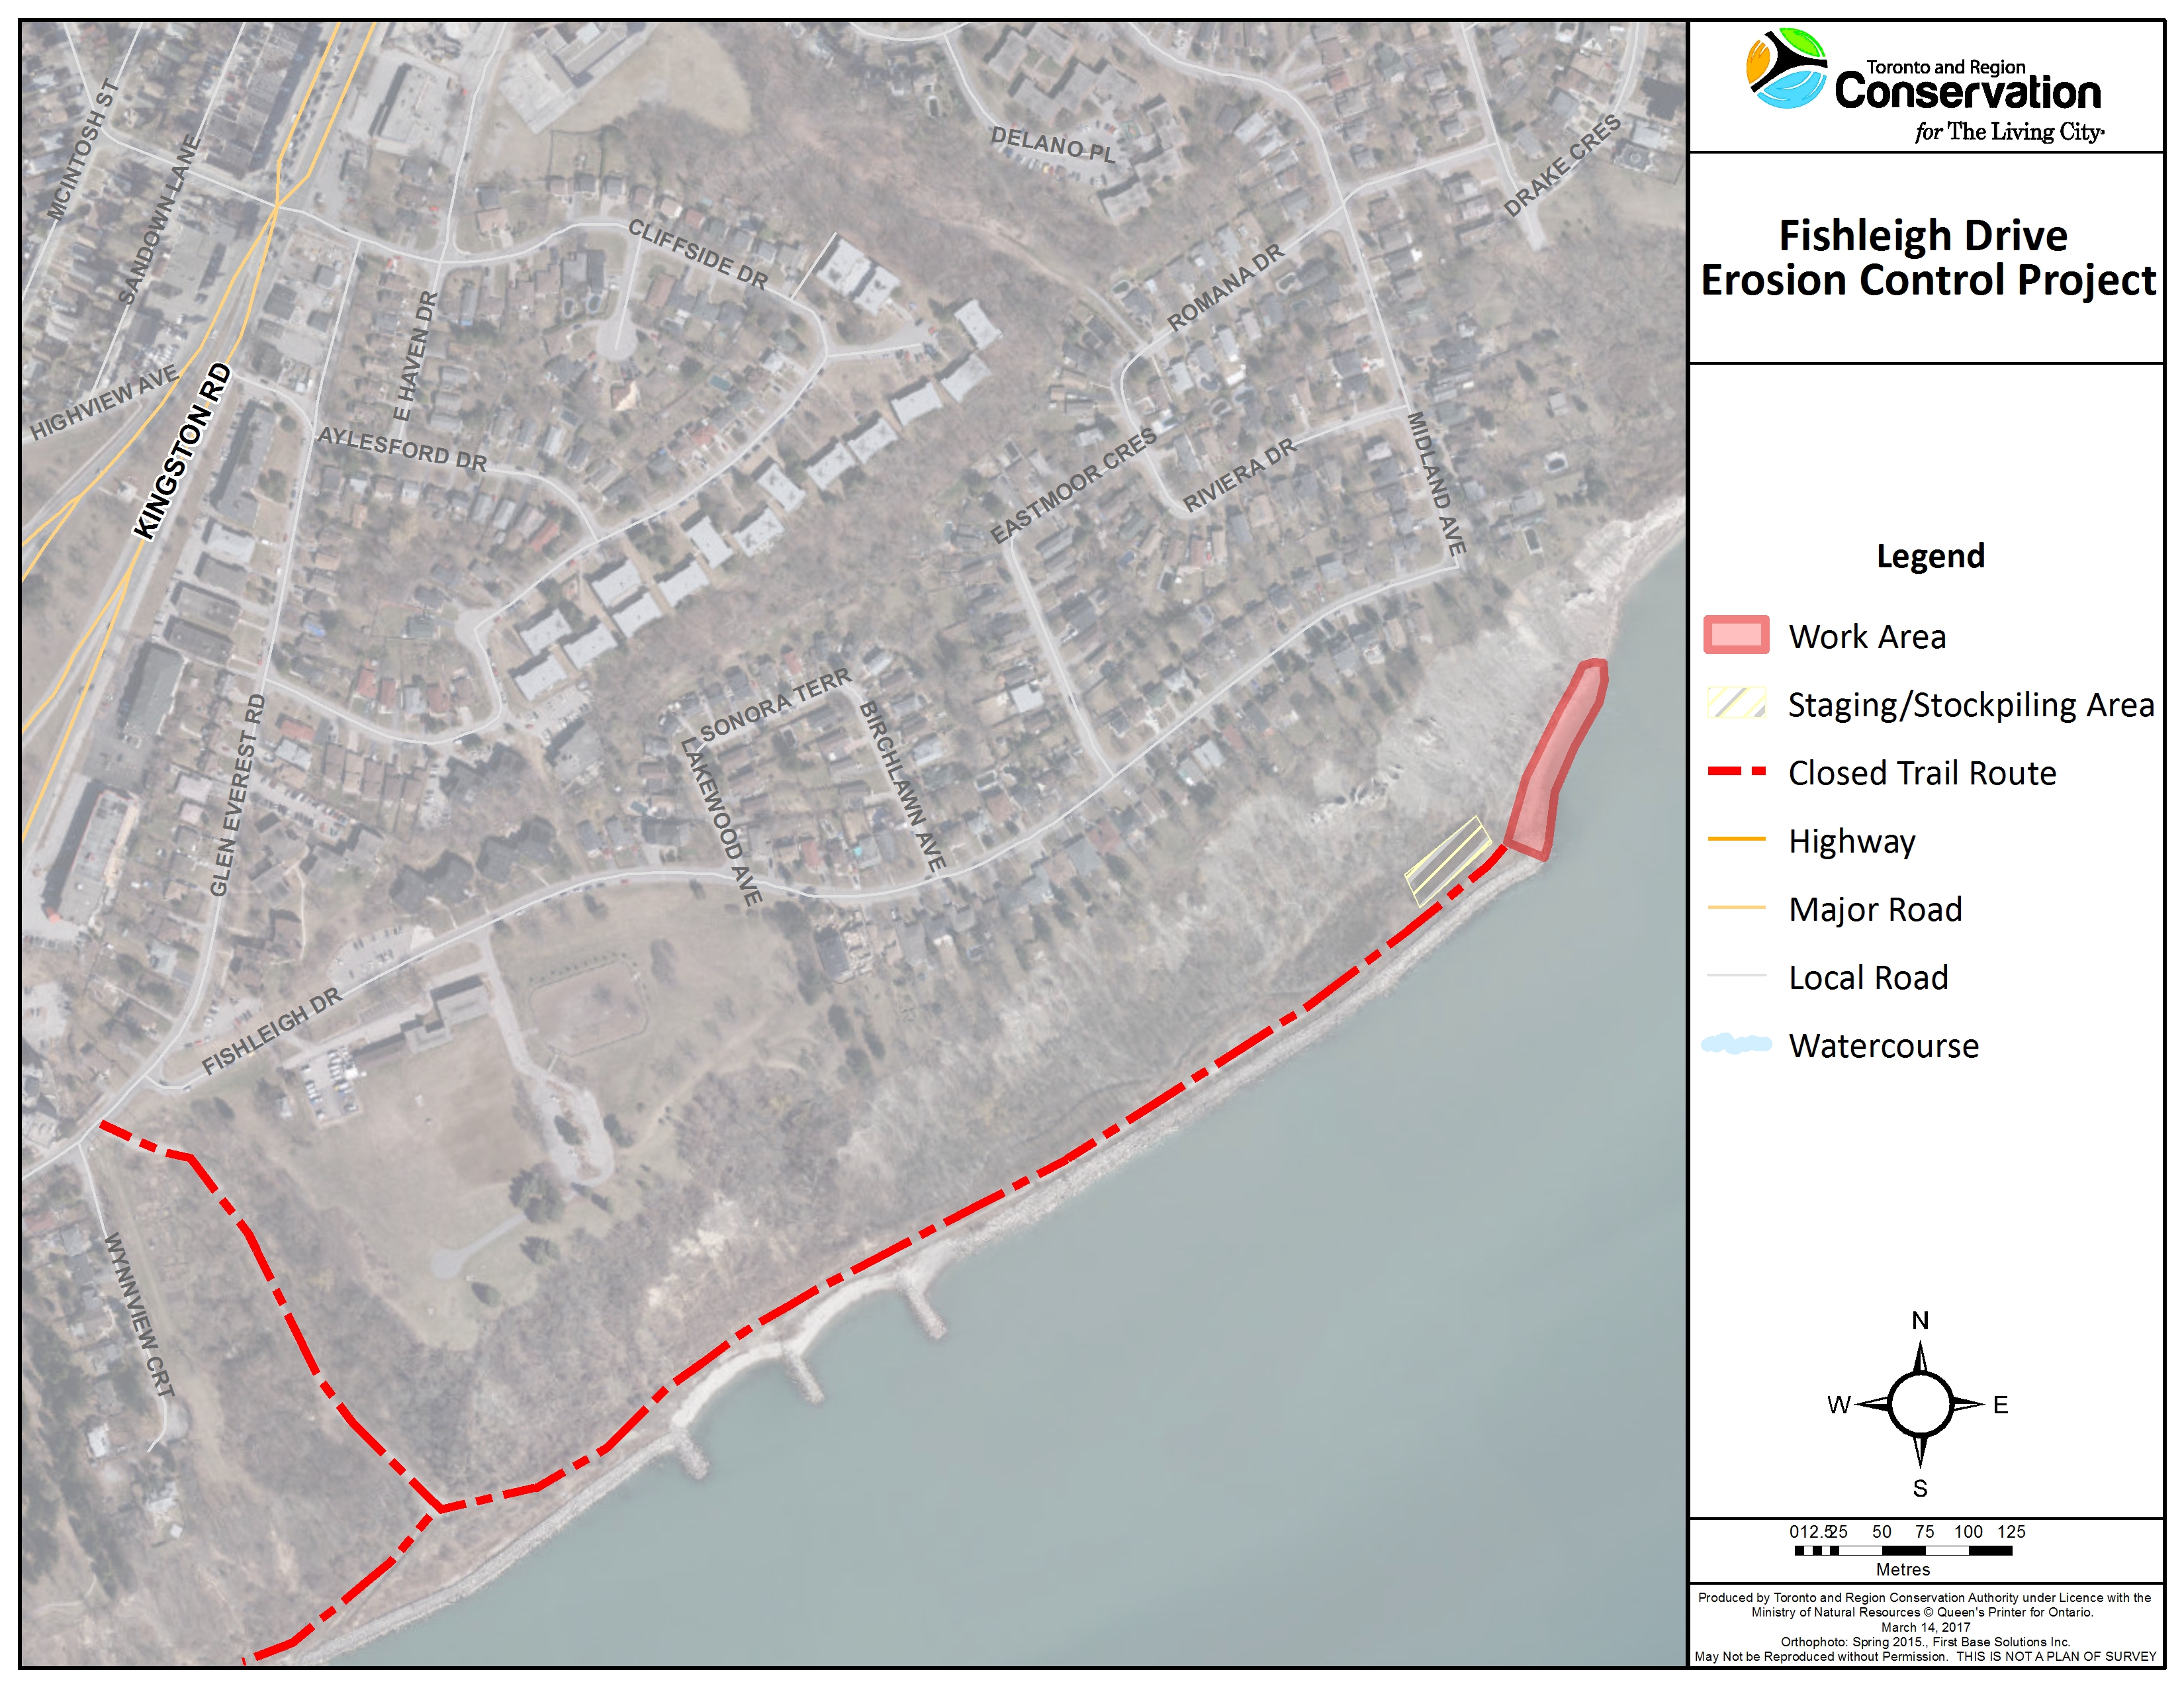 Fishleigh Drive Erosion Control Project map